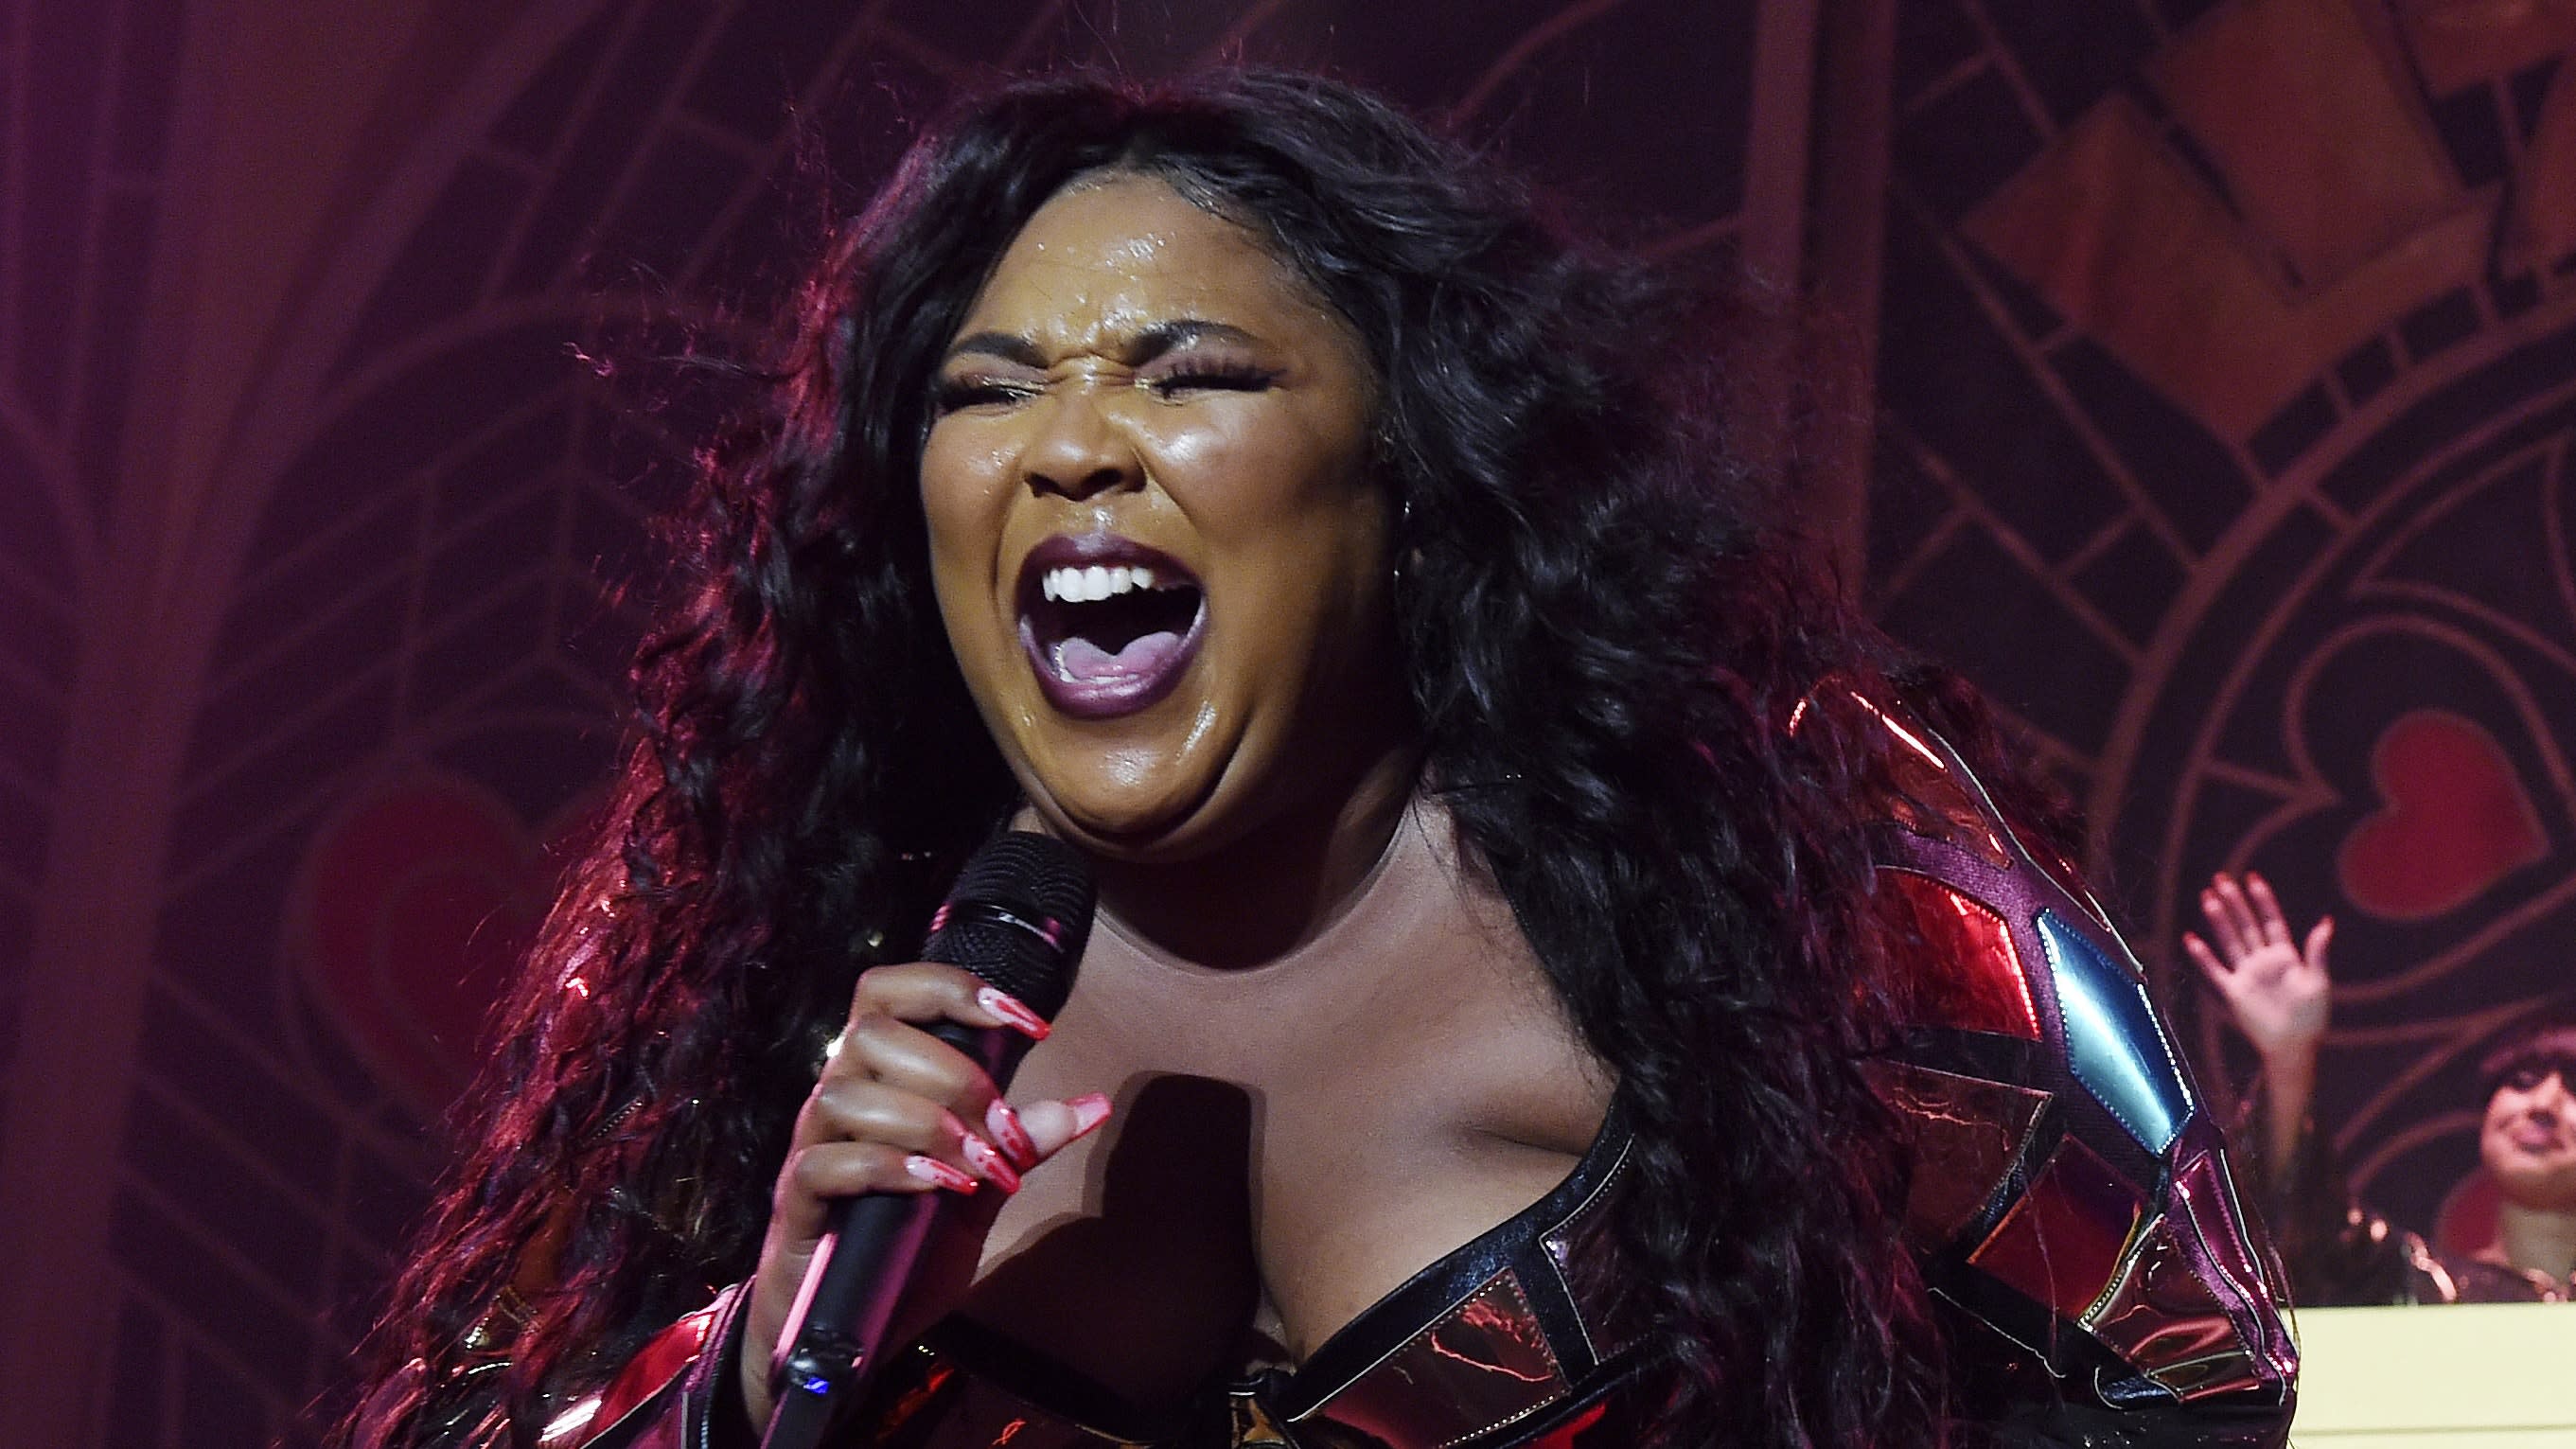 Pop star Lizzo ‘wins Halloween’ with hilarious costume